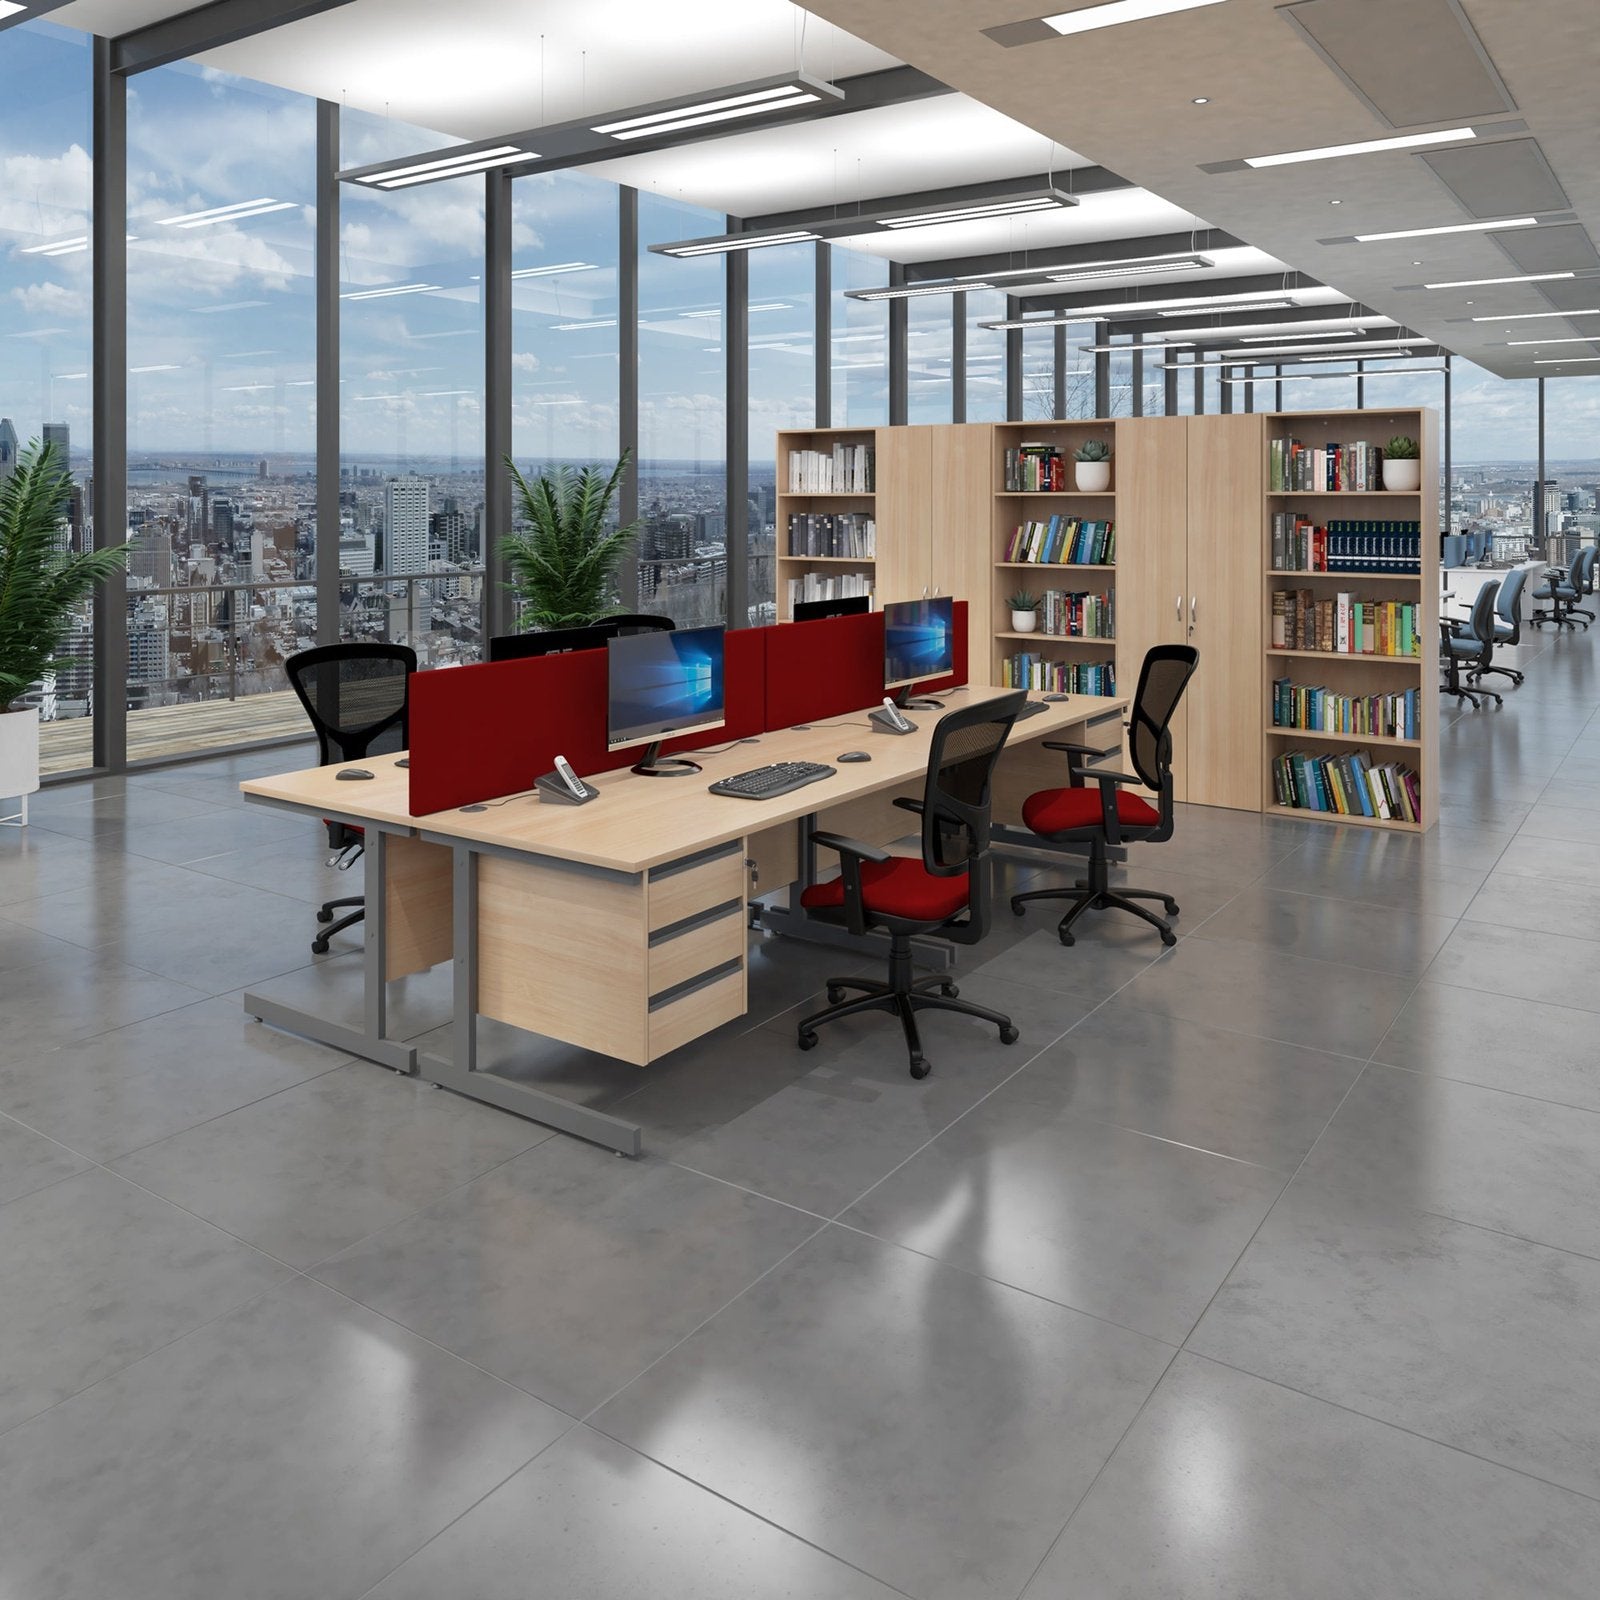 Contract 25 left hand ergonomic desk with cantilever leg - Office Products Online